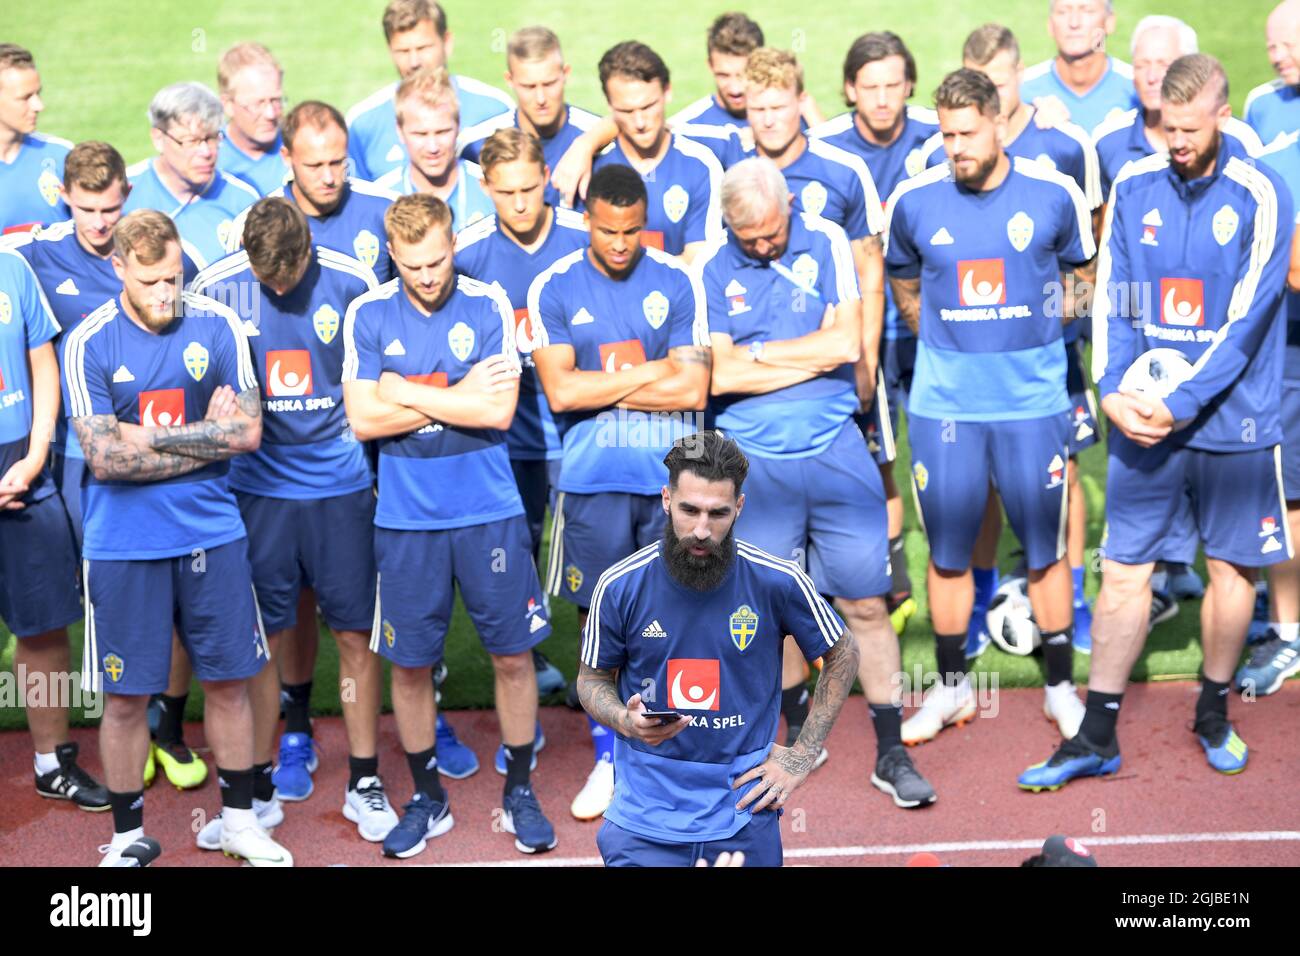 Swedish national soccer player Jimmy Durmaz speaks during a press conference, backed by his team, in connection to the team's training session at Spartak Stadium in Gelendzjik on June 24, 2018, the day after the World Cup group match against Germany. Durmaz was harrased wigh racist comments on internet after the loss  against Germany.   Stock Photo